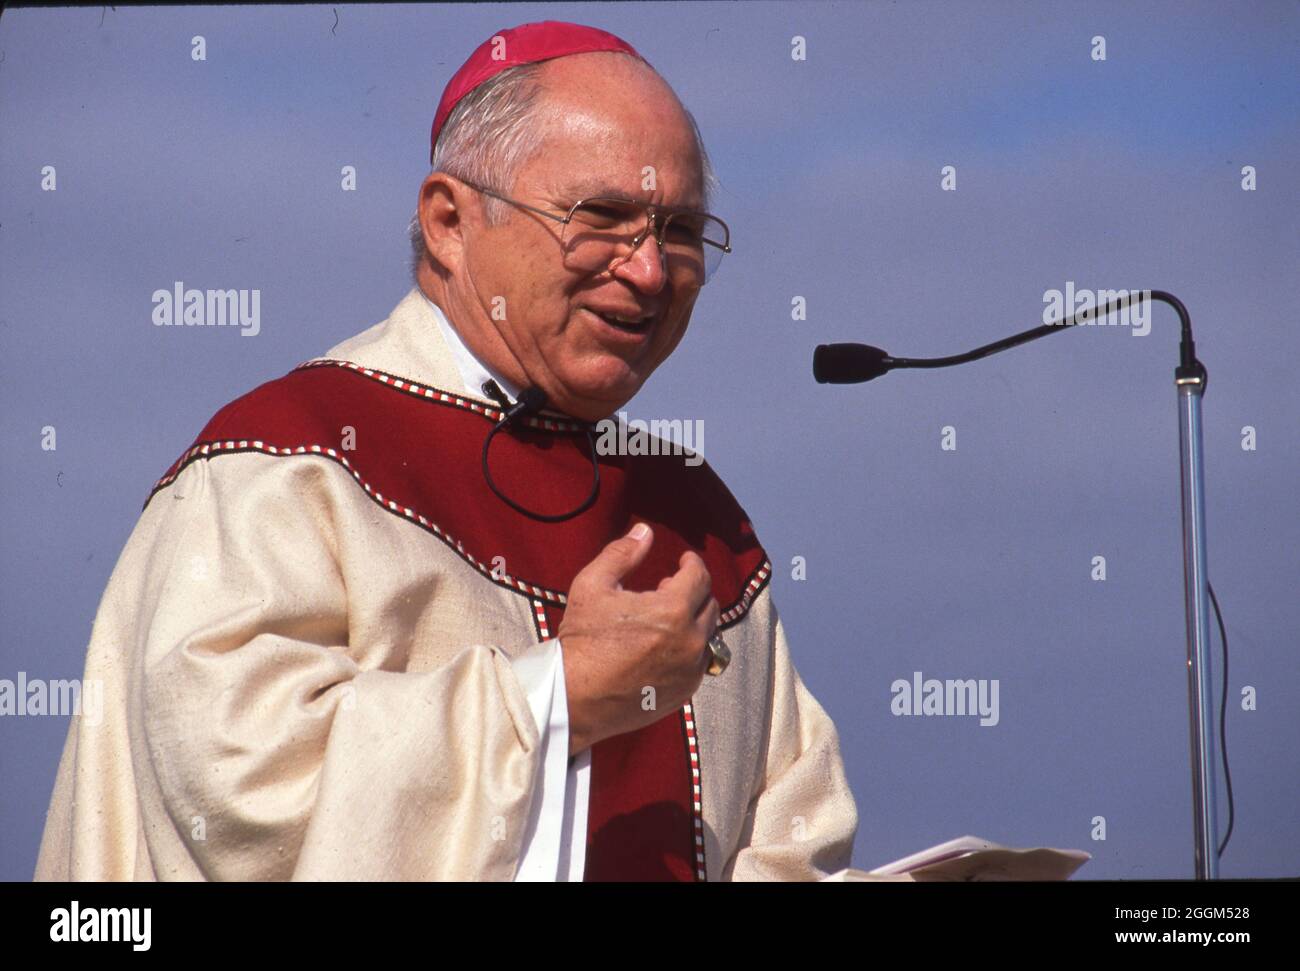 San Antonio Texas USA, circa 1994: Patrick Flores, archbishop of San Antonio, makes a speech, Flores was the first Mexican-American to become a bishop in the Catholic Church. ©Bob Daemmrich Stock Photo